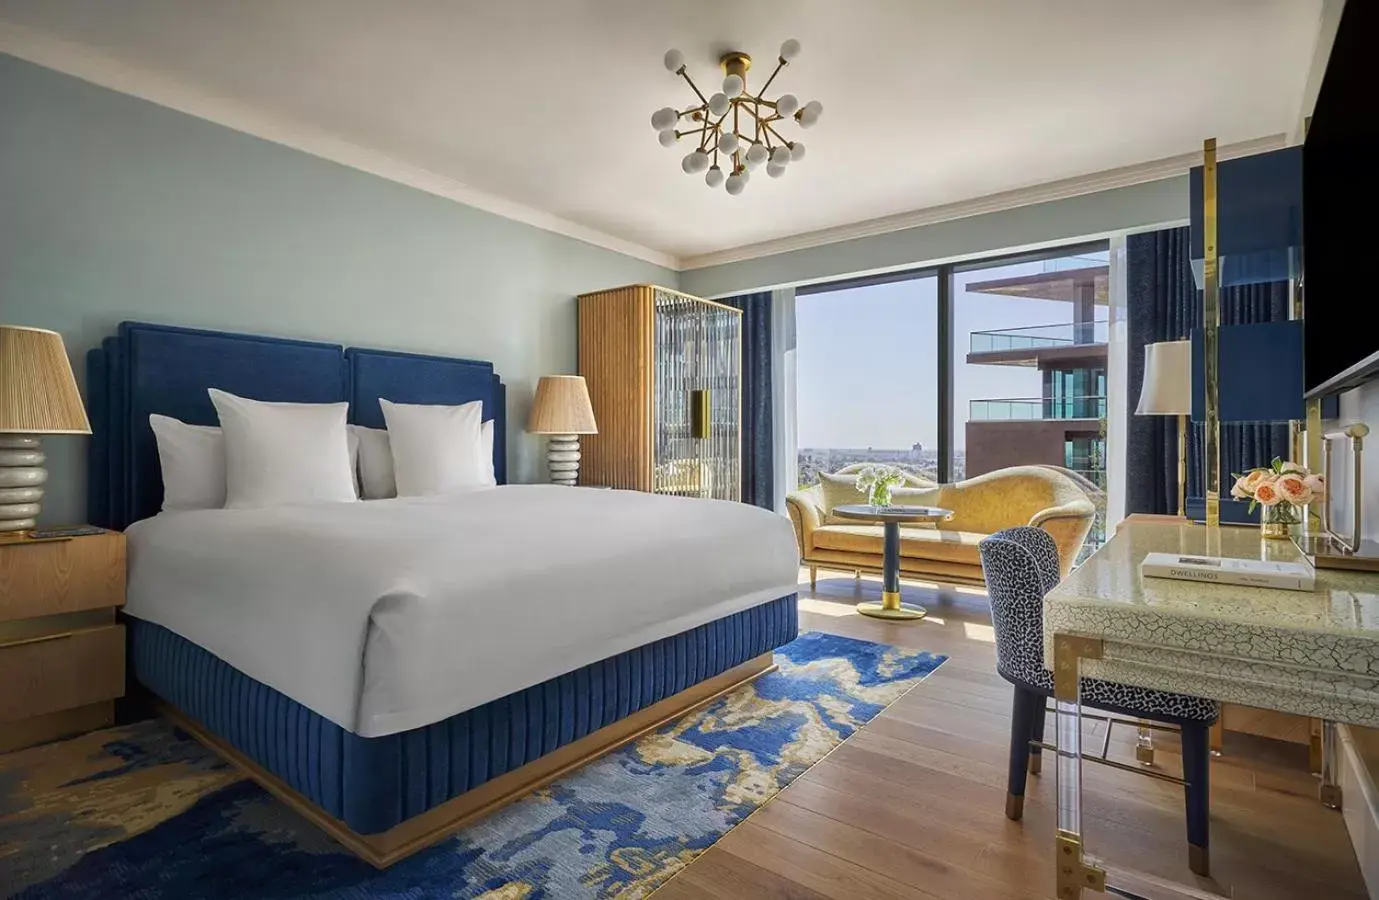 Skyline King Room in Pendry West Hollywood